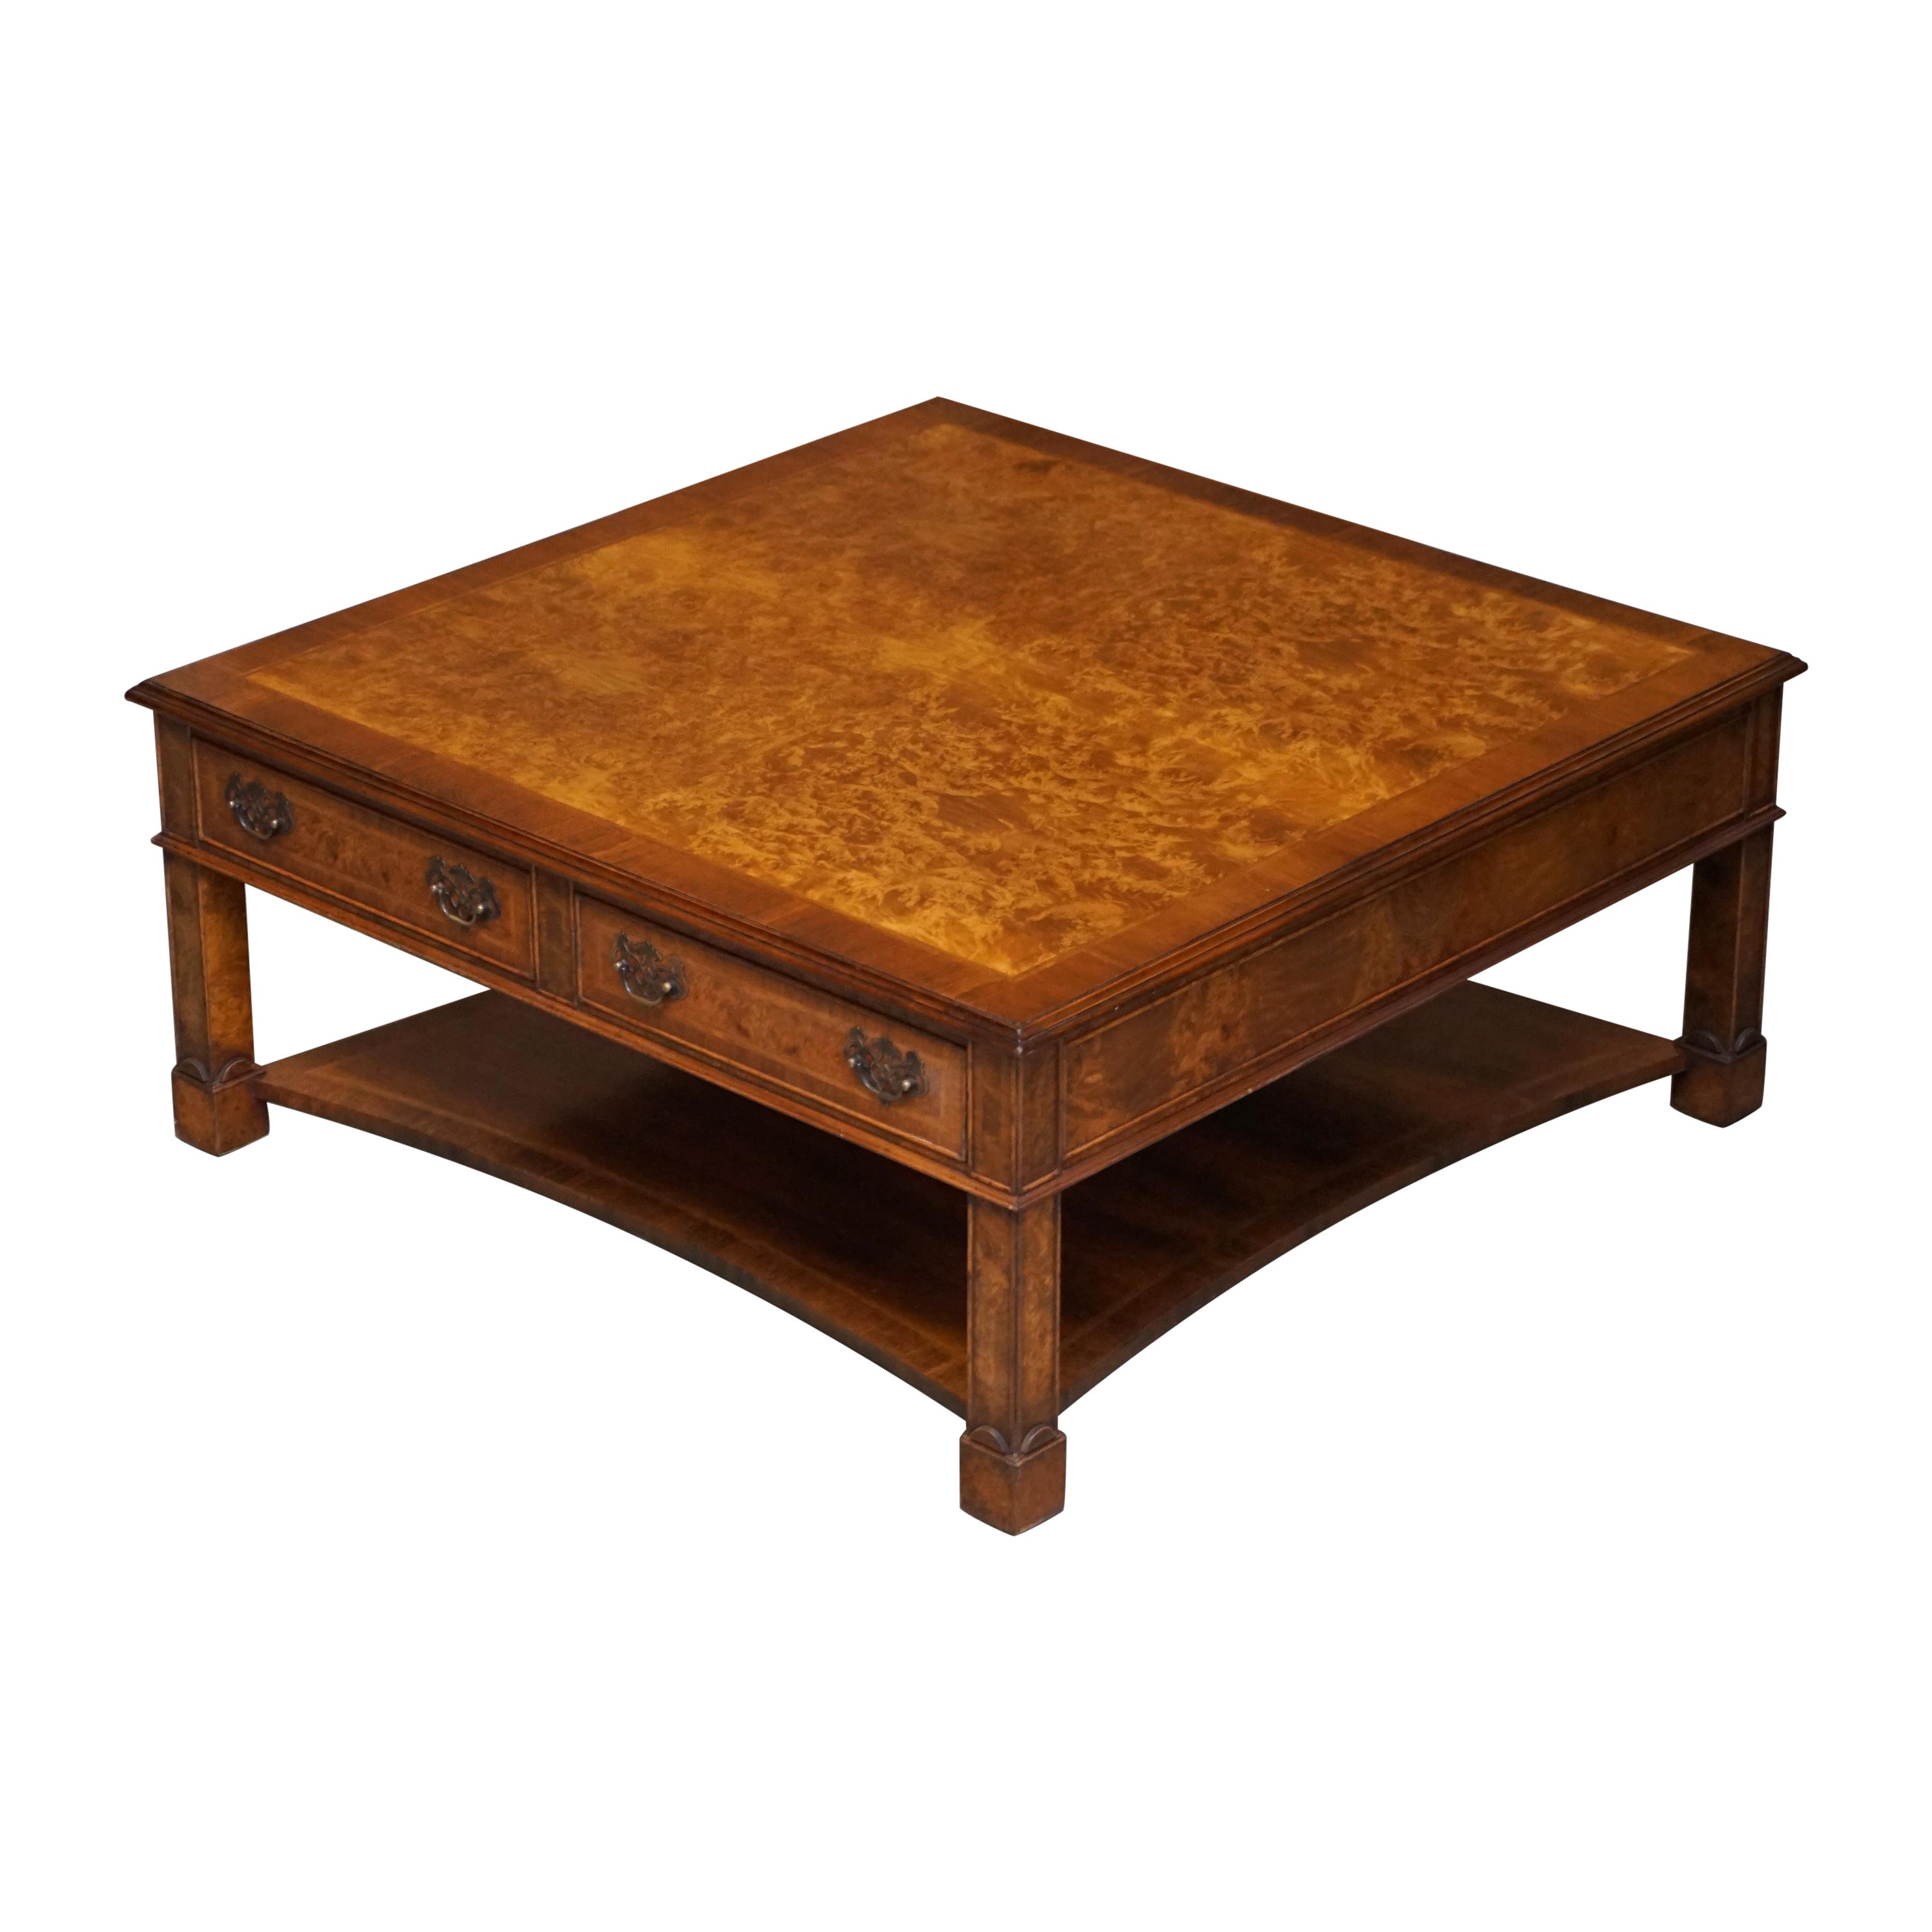 Brights of Nettlebed Burr Walnut Restored Large 4 Drawer Coffee Table